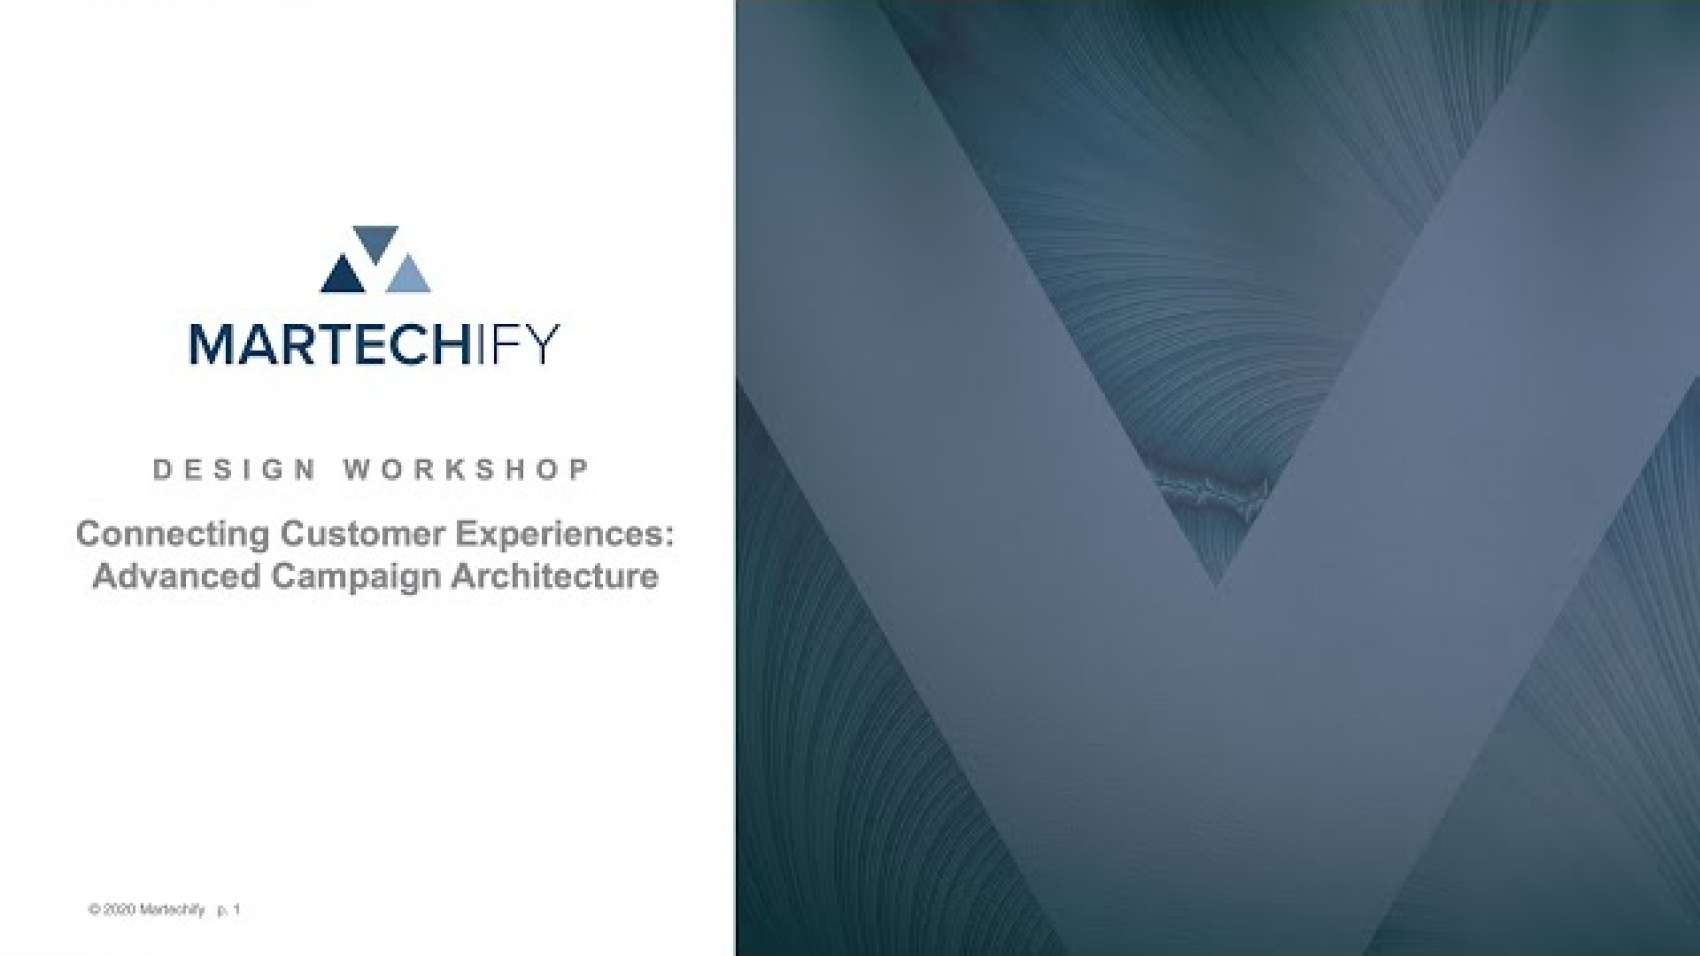 Martechify - Design Workshop. Connecting Customer Experiences - Advanced Campaign Architecture.